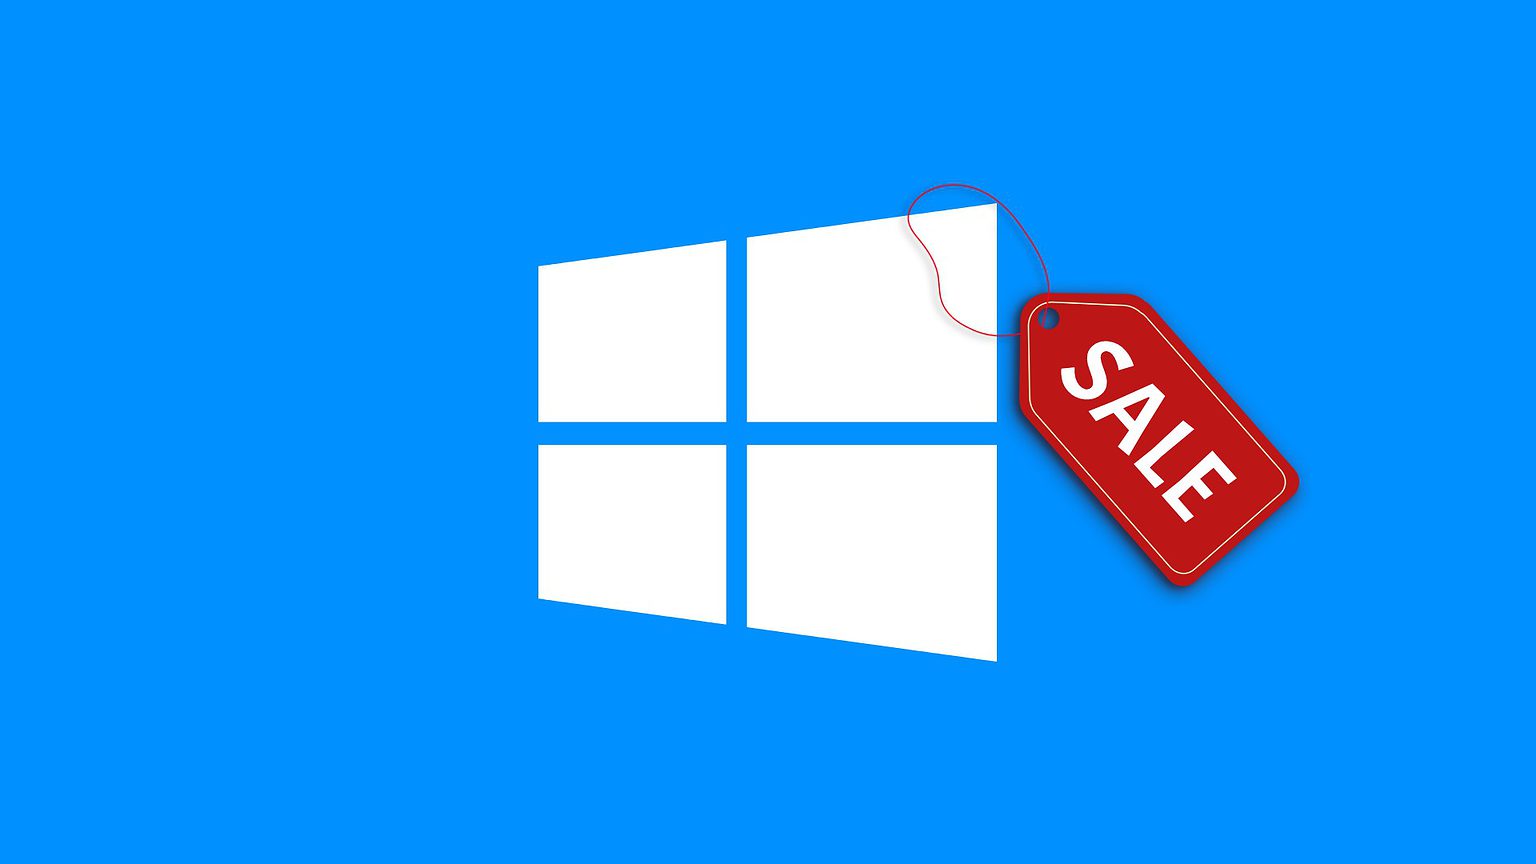 Get great deals on Microsoft software by using promo code CULT at CdkeySales.com.